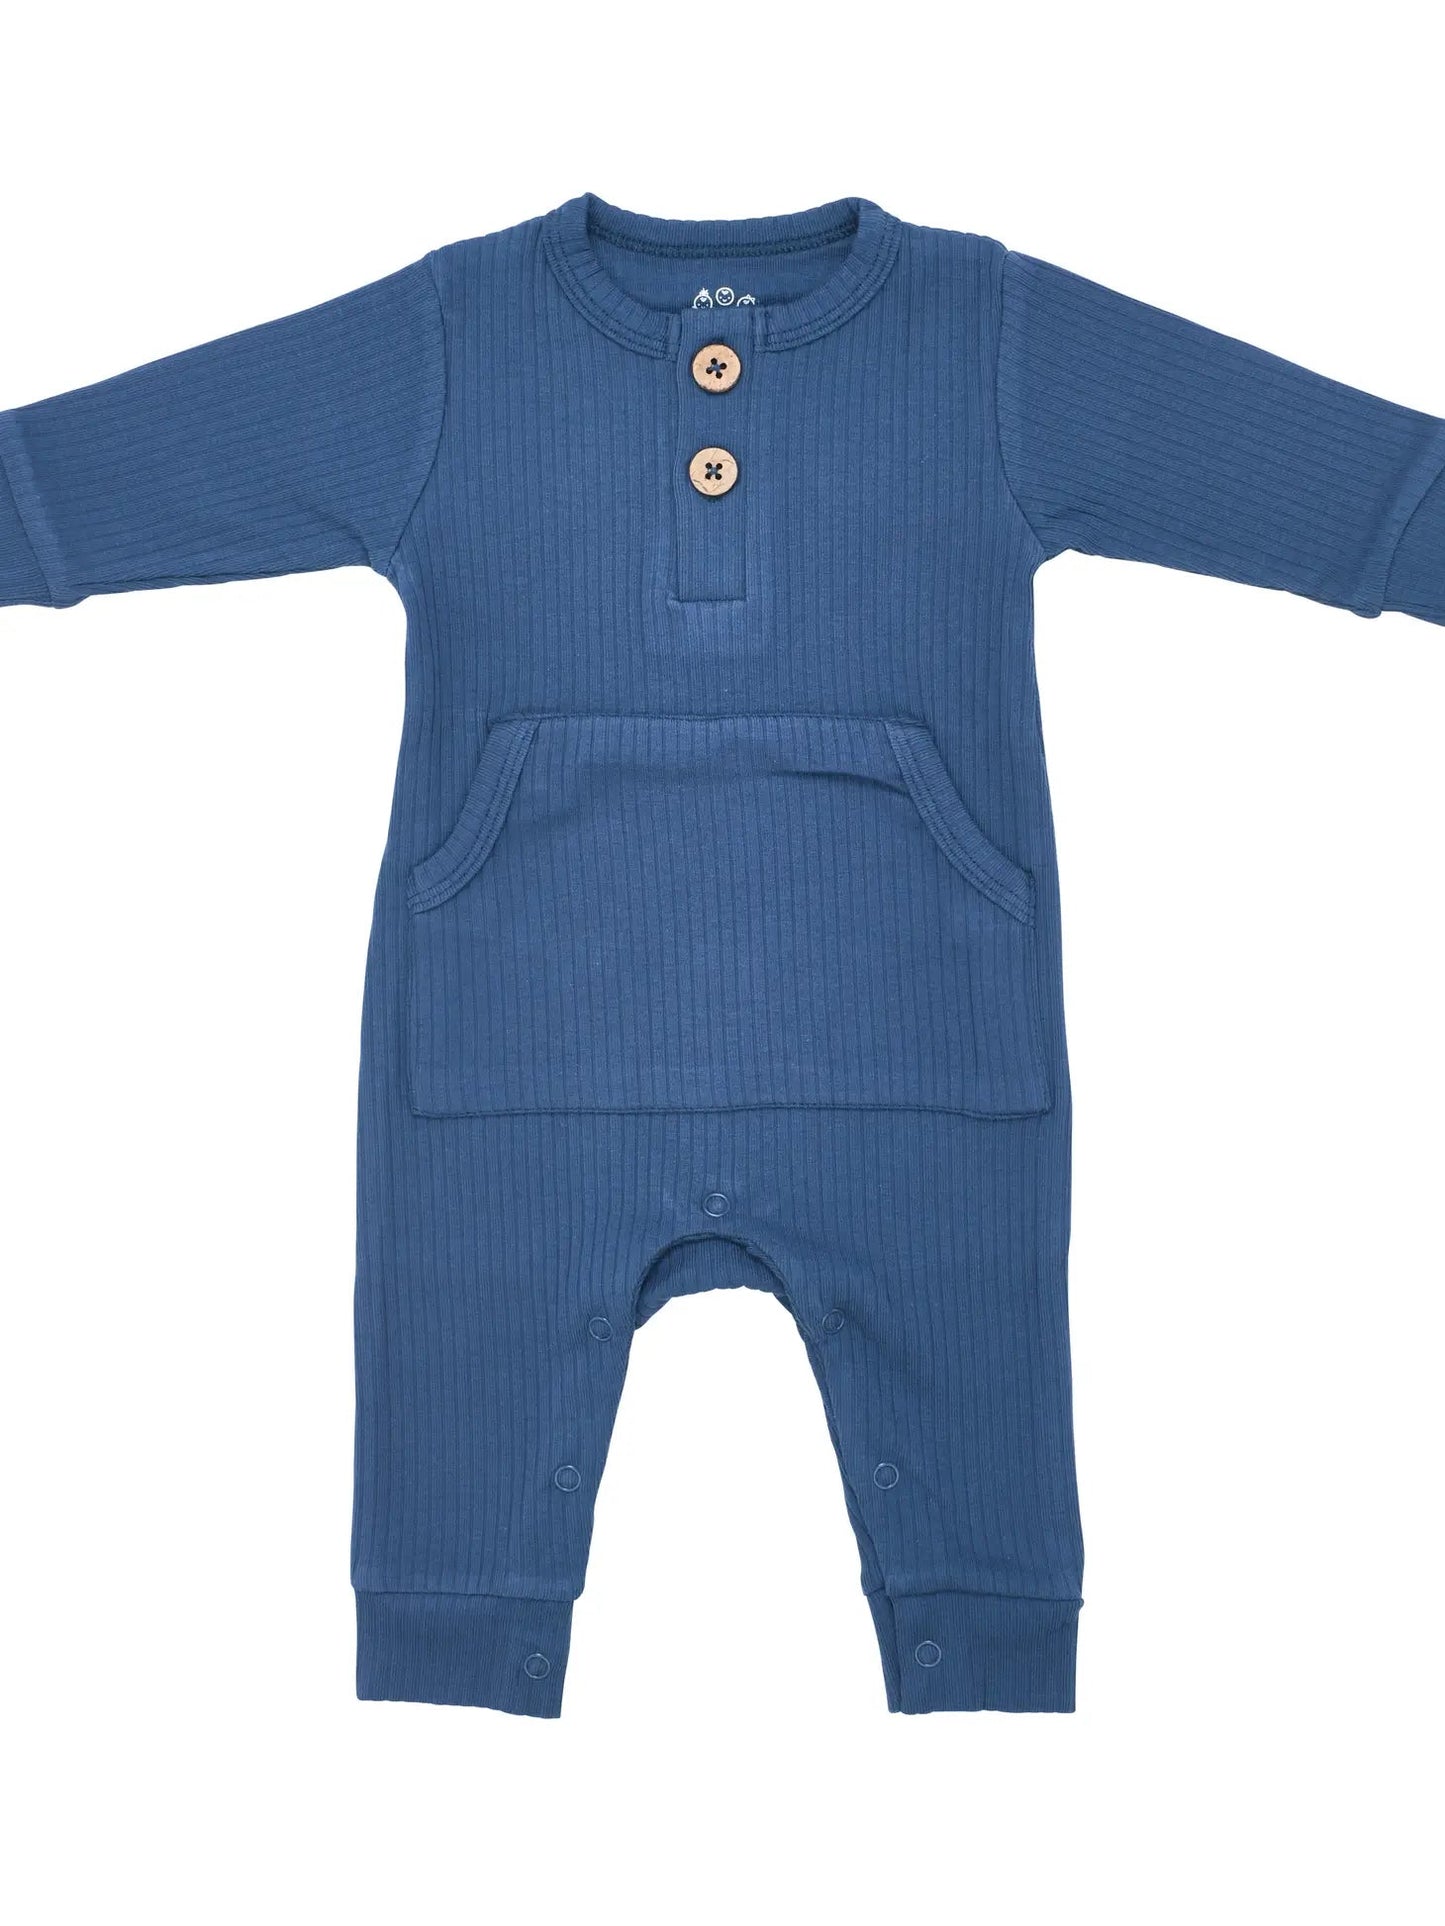 Baby Ribbed Playsuit - Wild Child Hat CoThree Little TotsRomper